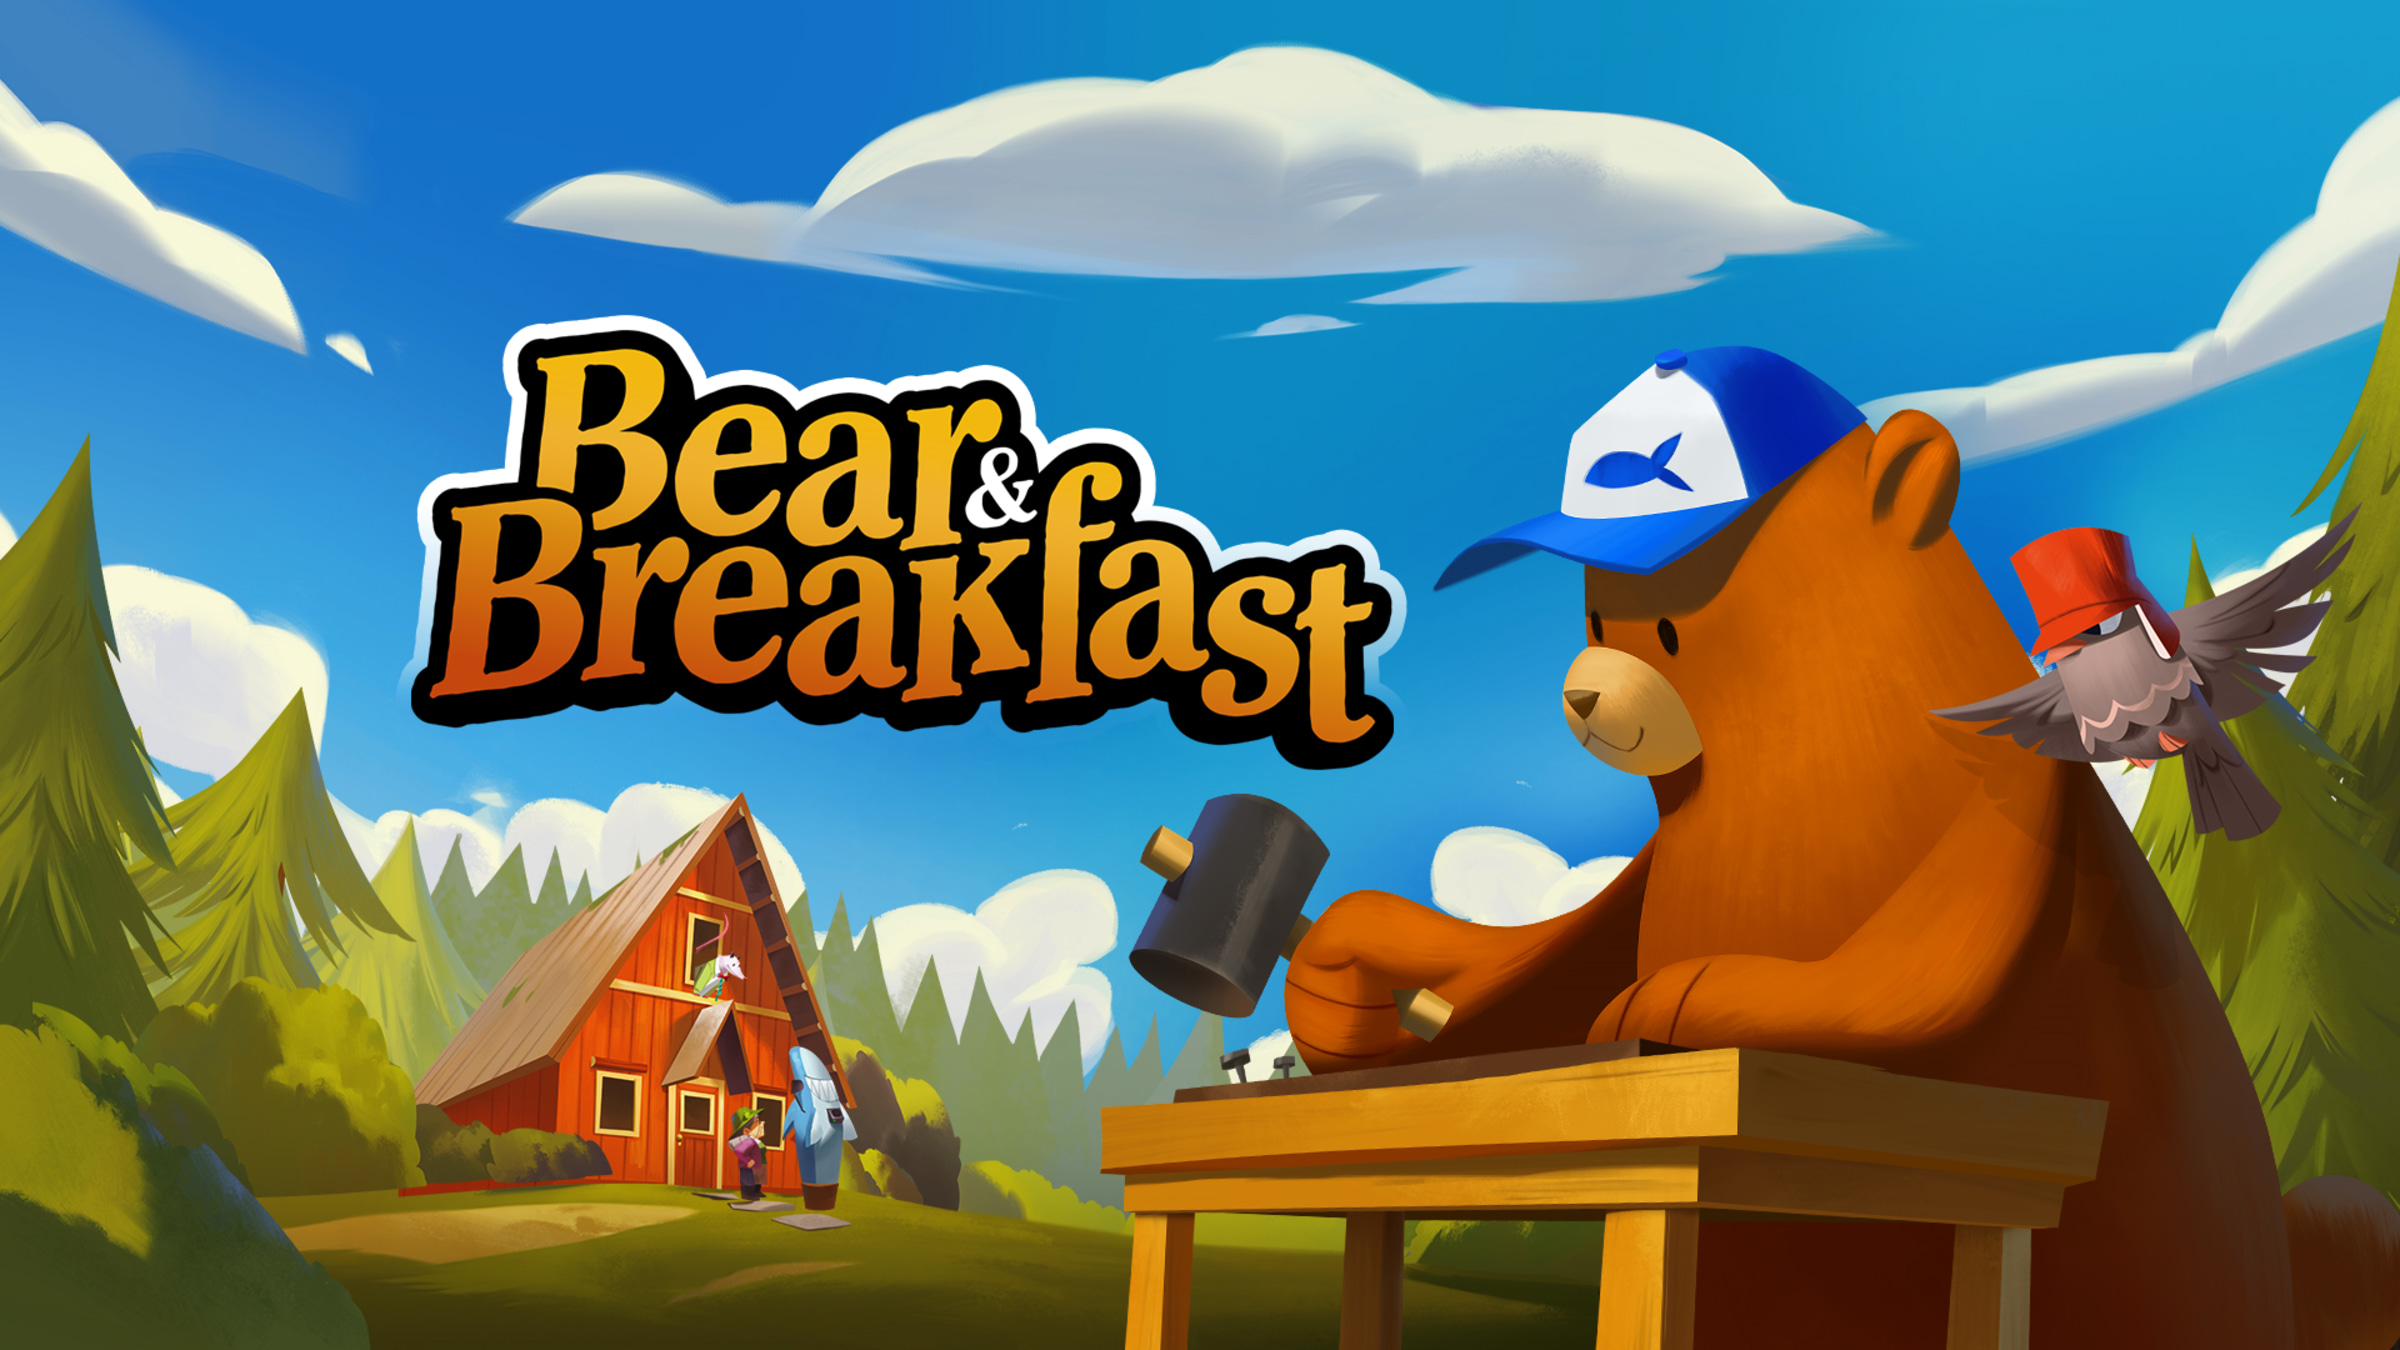 BED AND BREAKFAST 3 free online game on